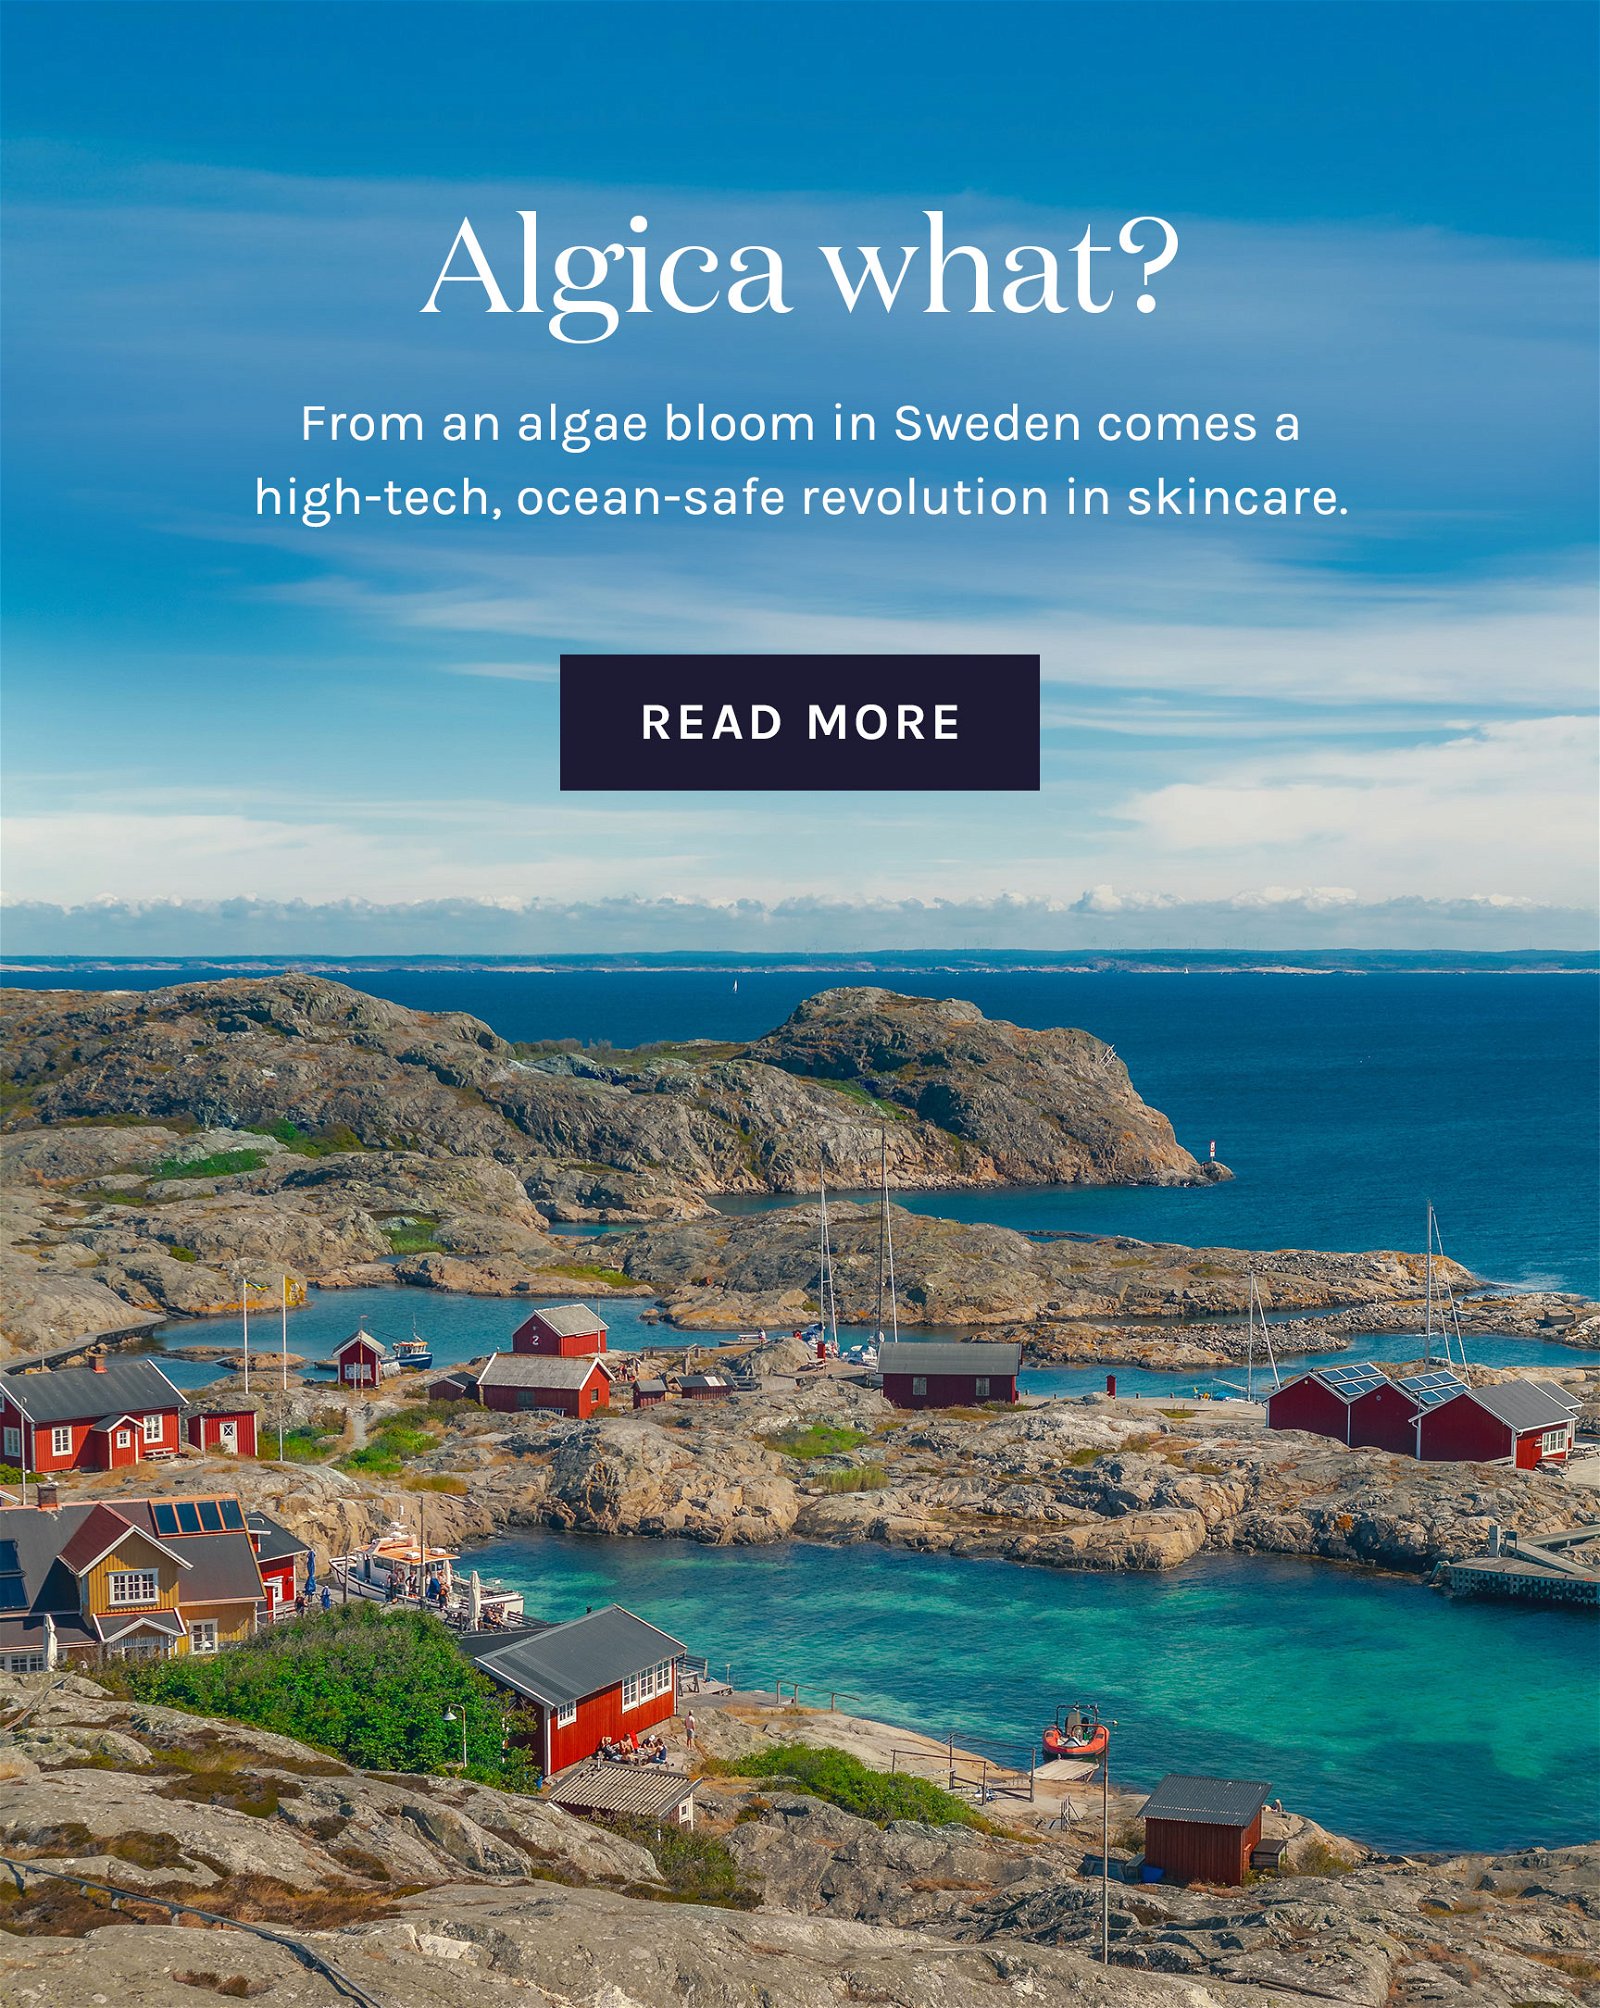 algica what? From an algae bloom in sweden comes a high-tech, ocean safe revolution in skincare.